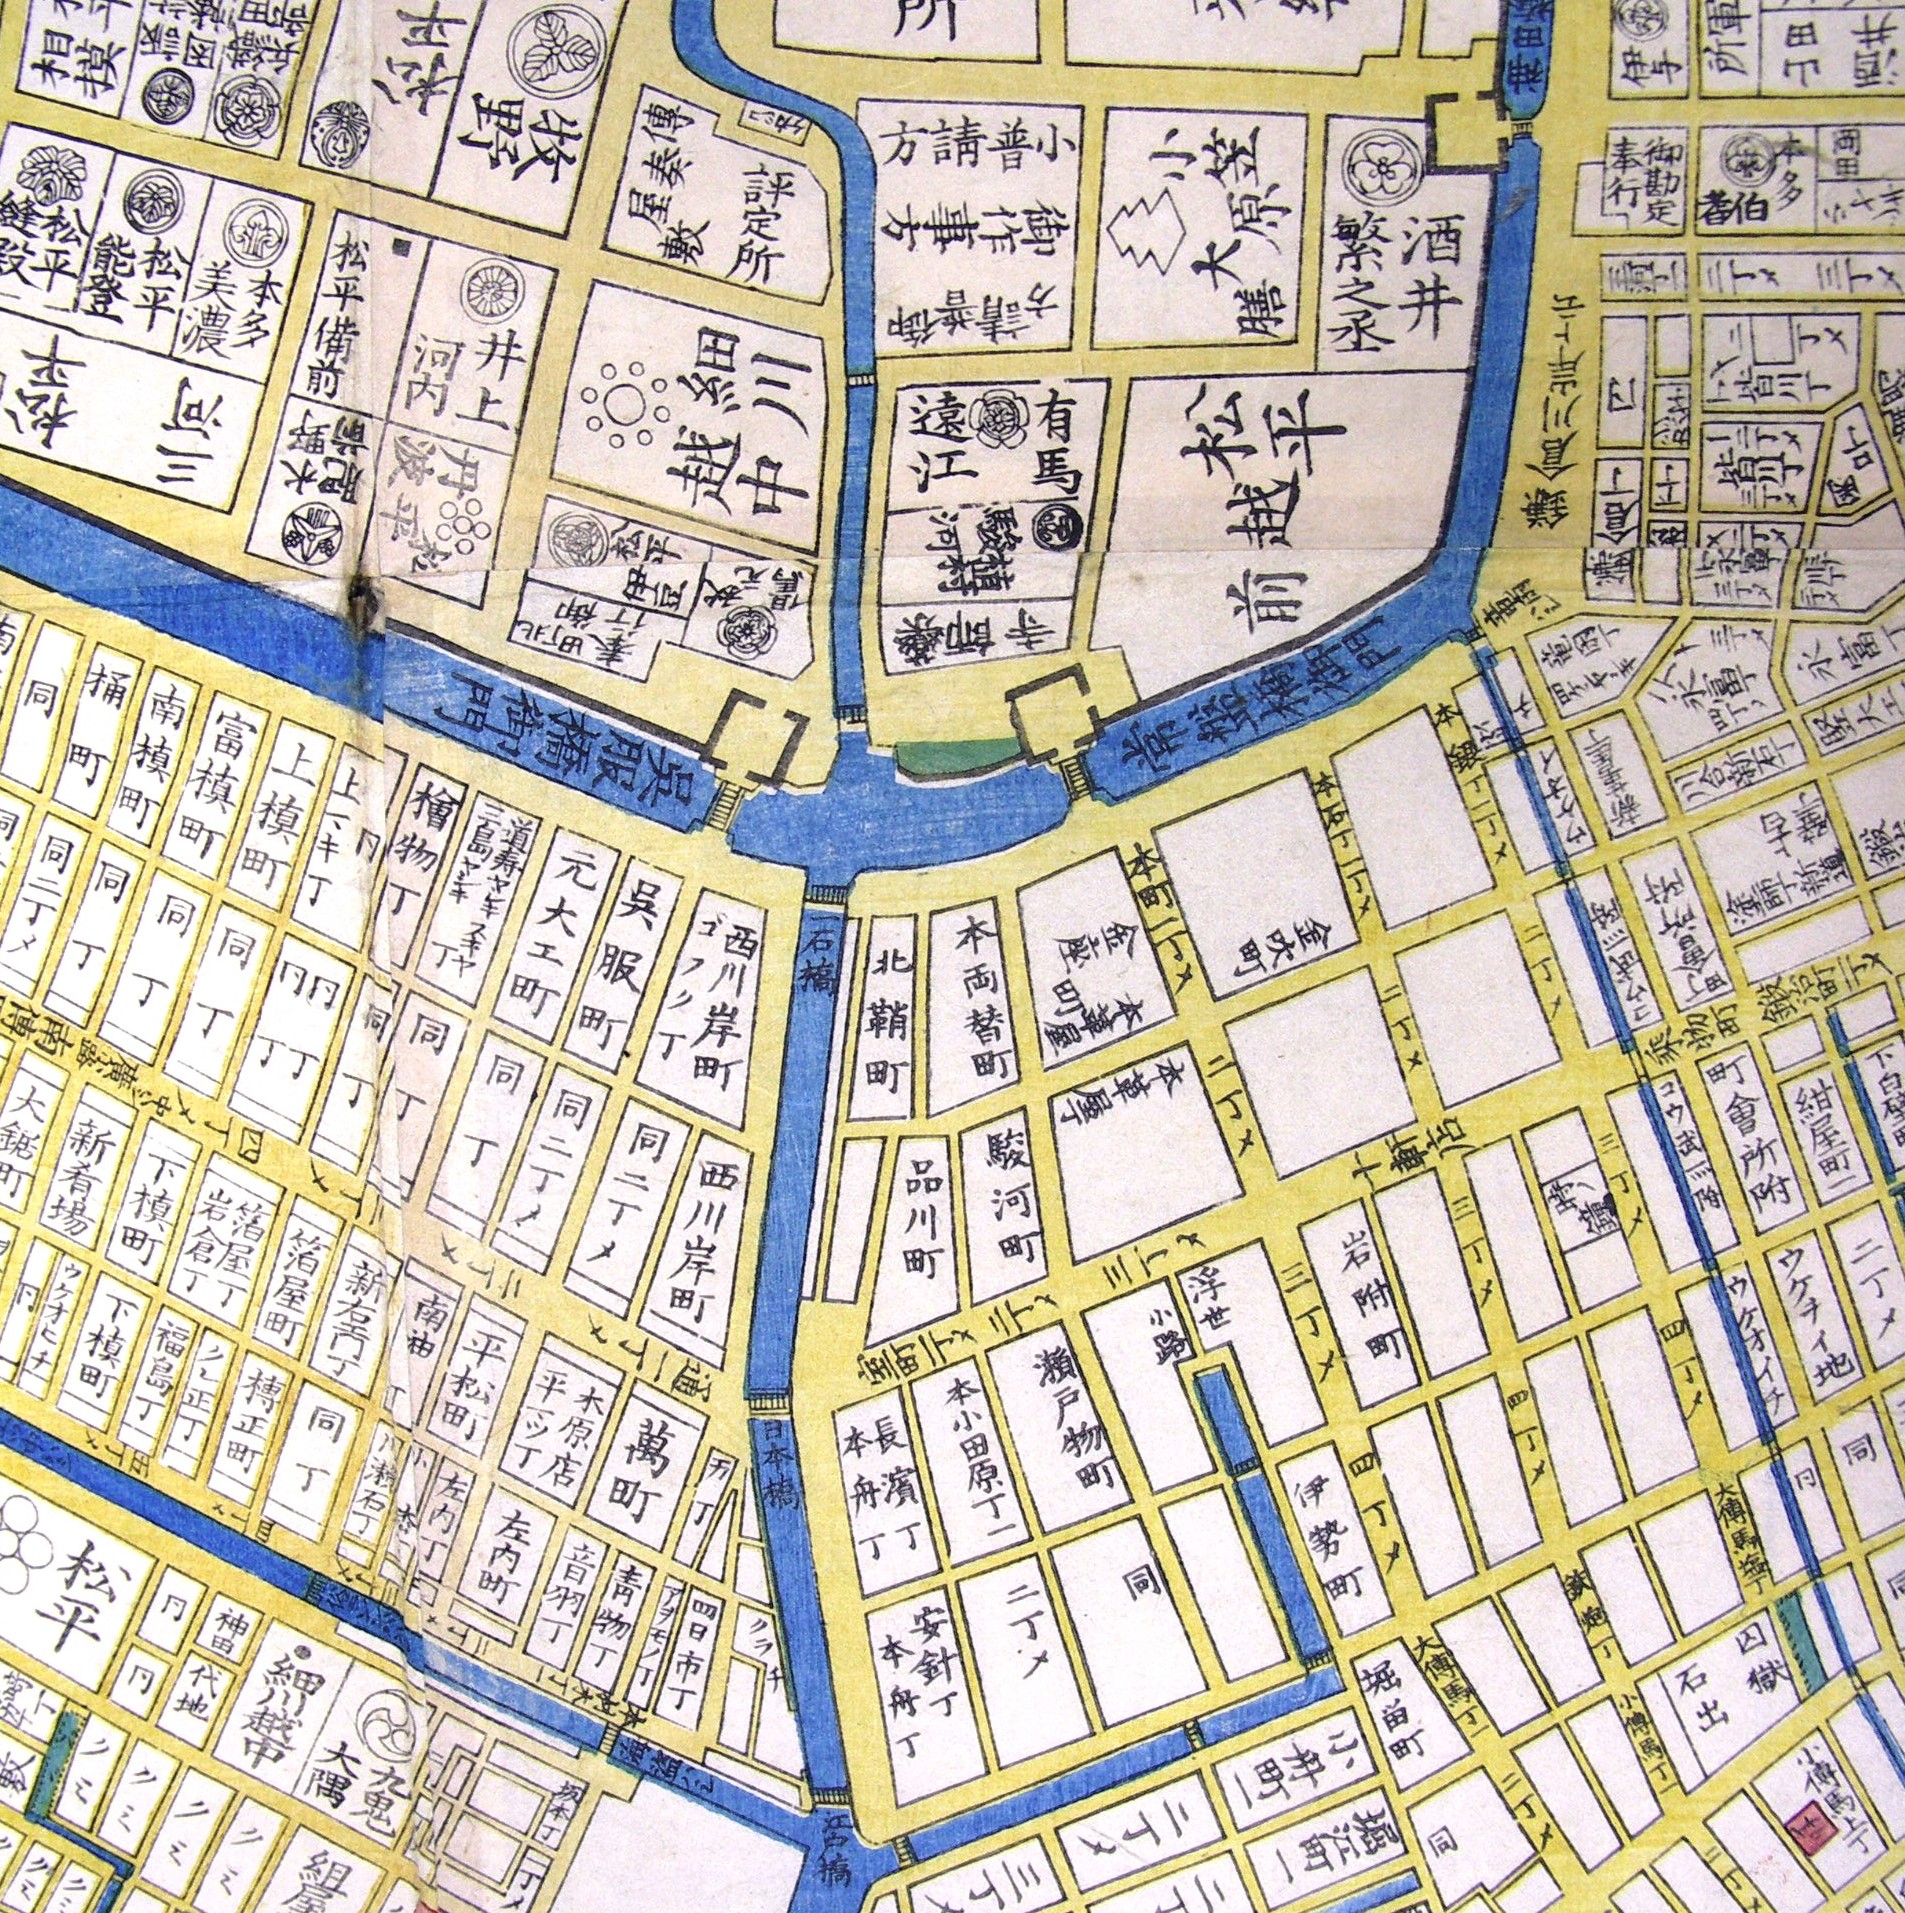 Image:location of kin-za during the Edo period on a historical map, showing the area of the Head Office today